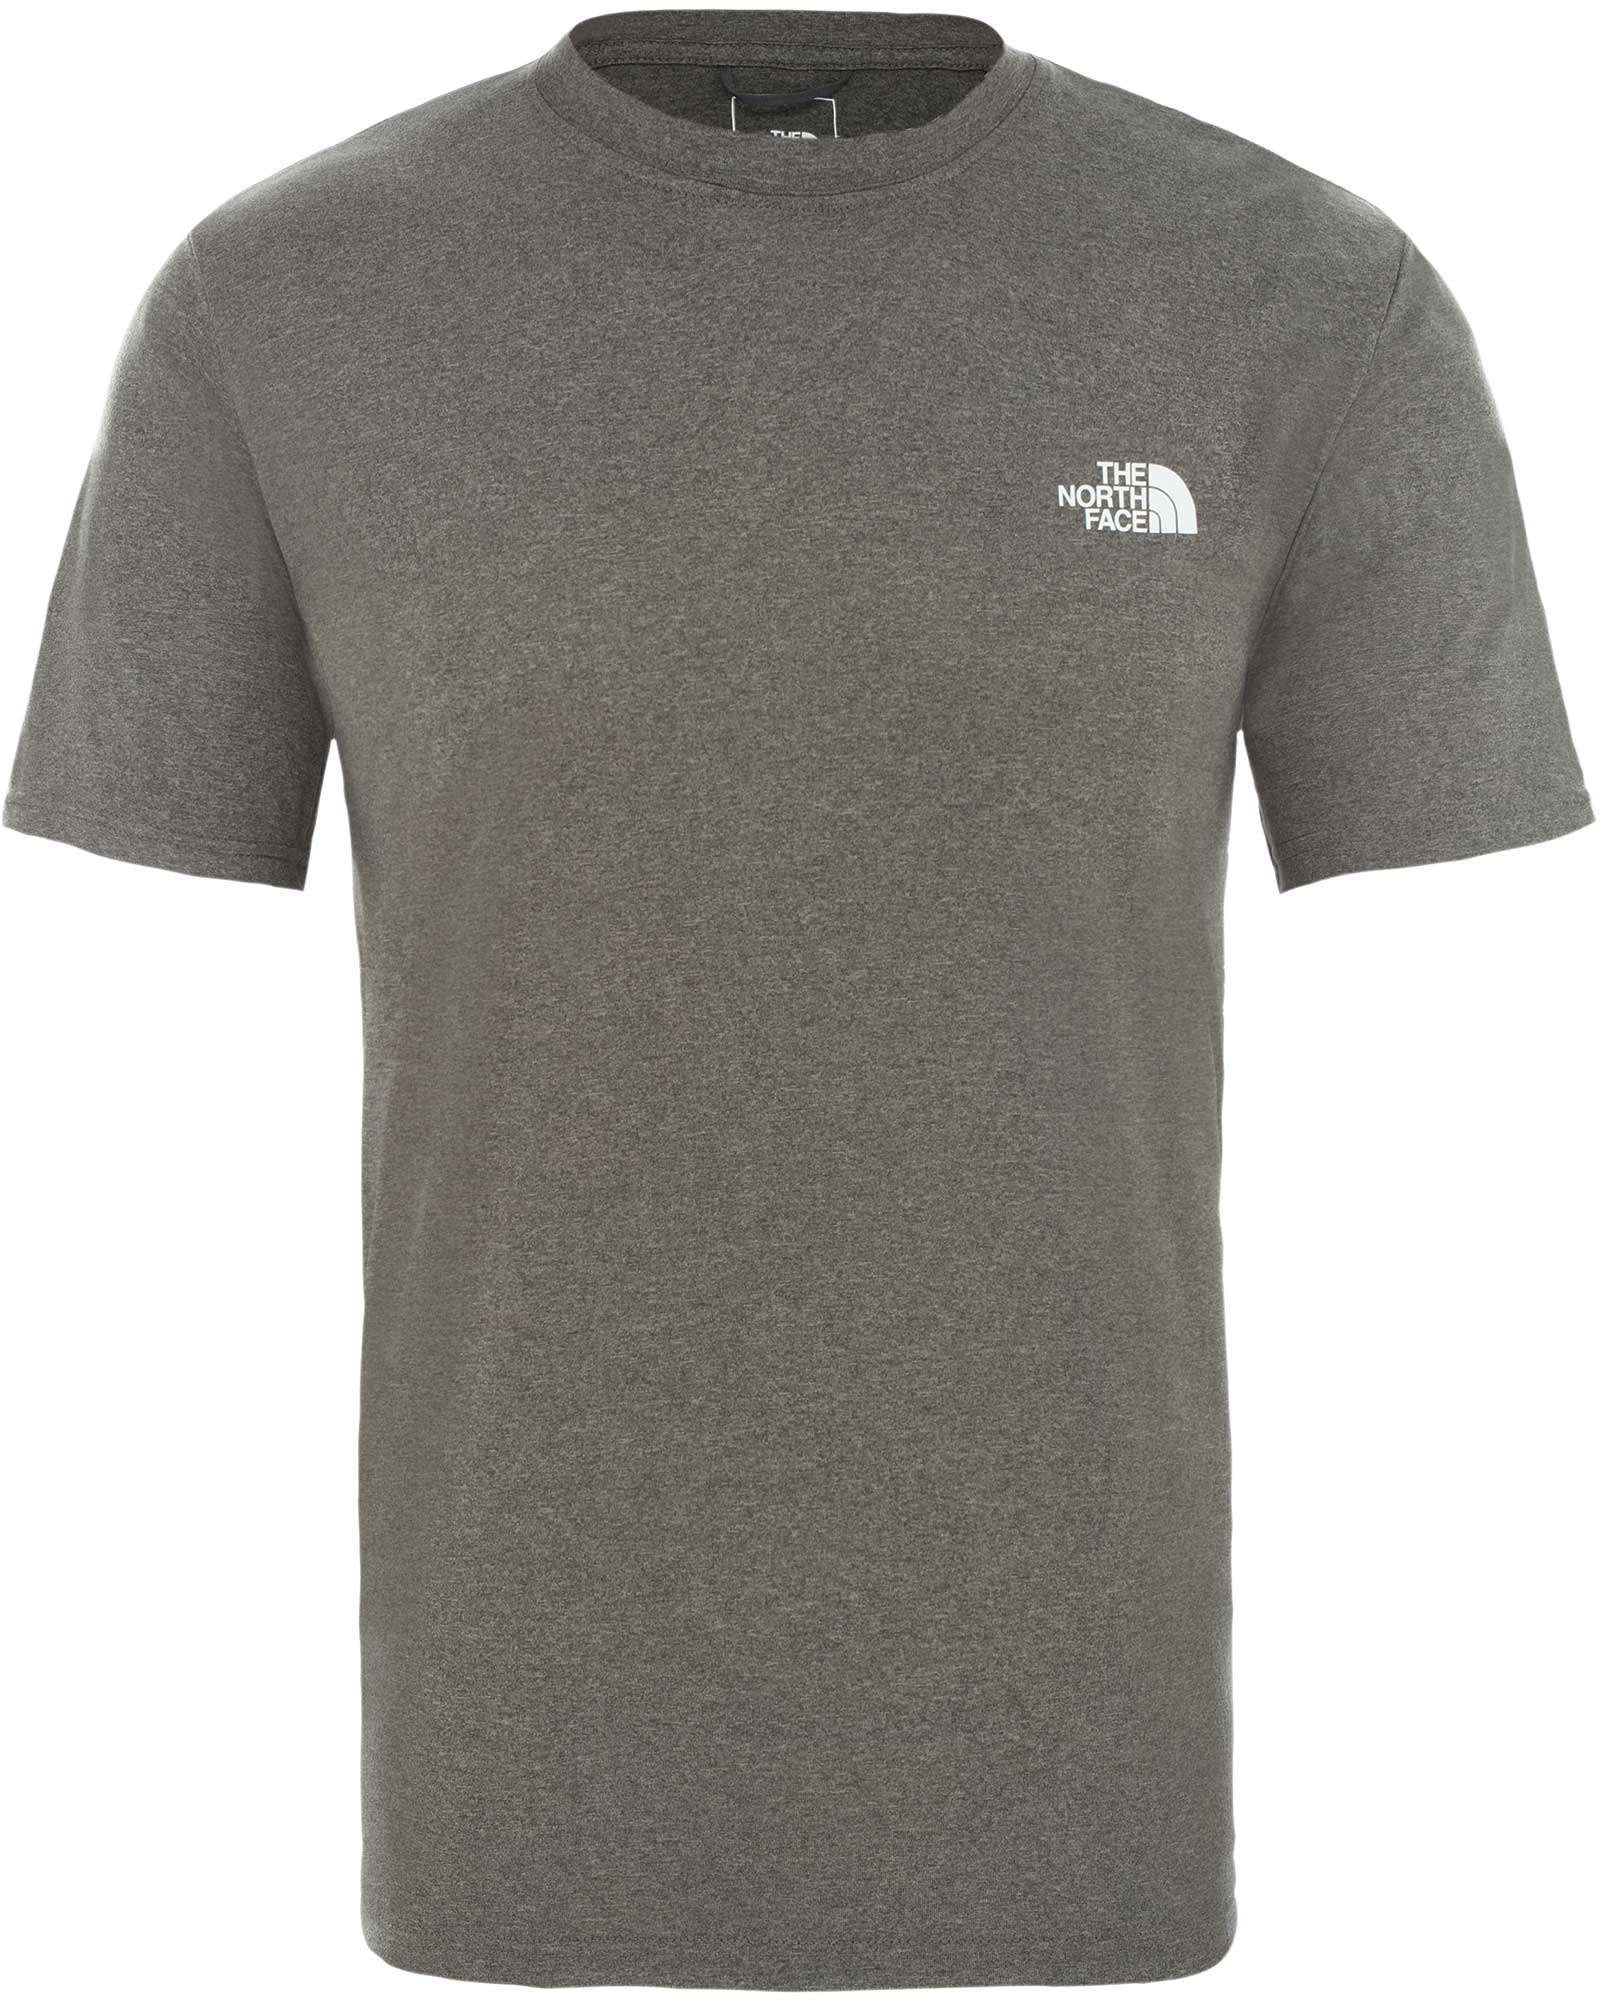 The North Face Reaxion Amp Men’s Crew T Shirt - New Taupe Green Heather XL